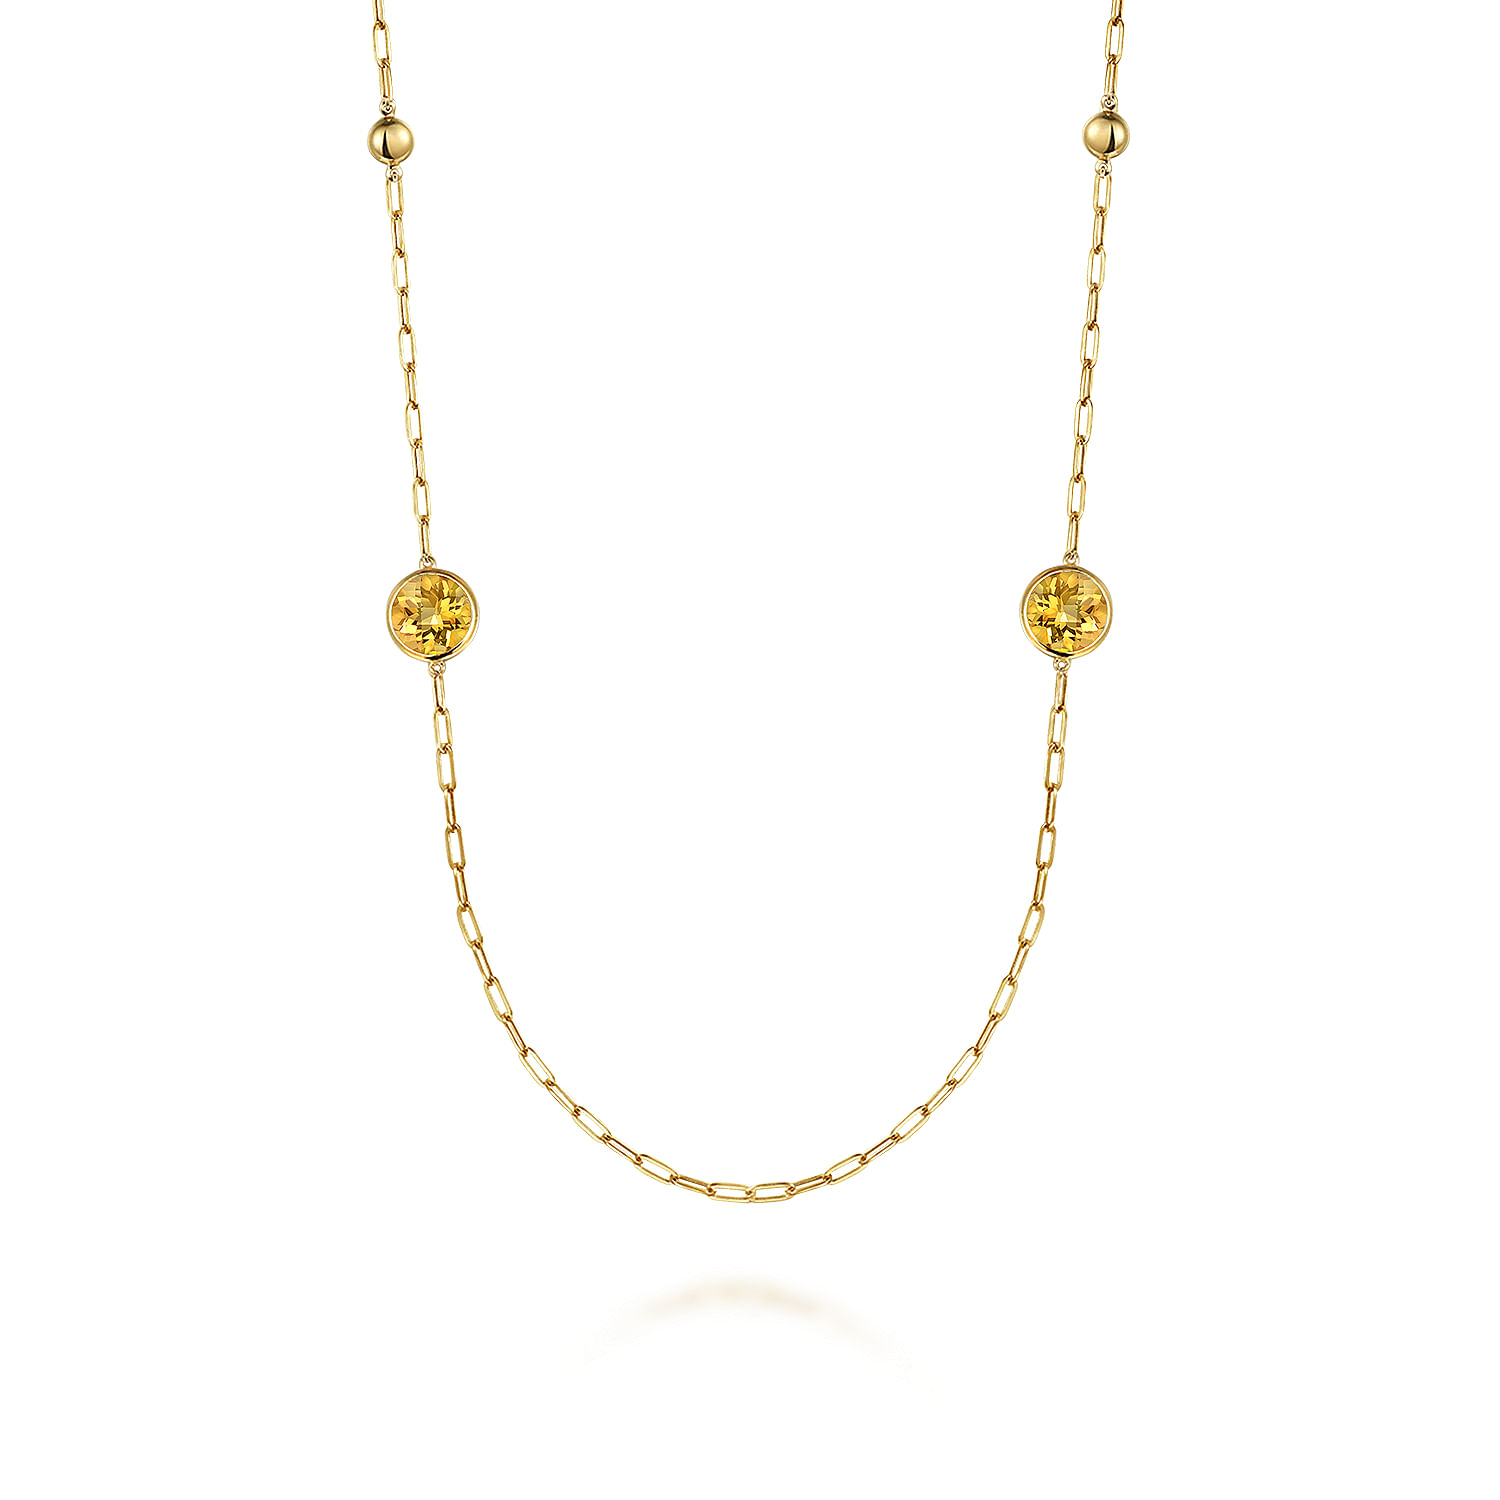 14K Yellow Gold Citrine Round Shape Necklace With Four Stations ,Beads and Bezel Setting